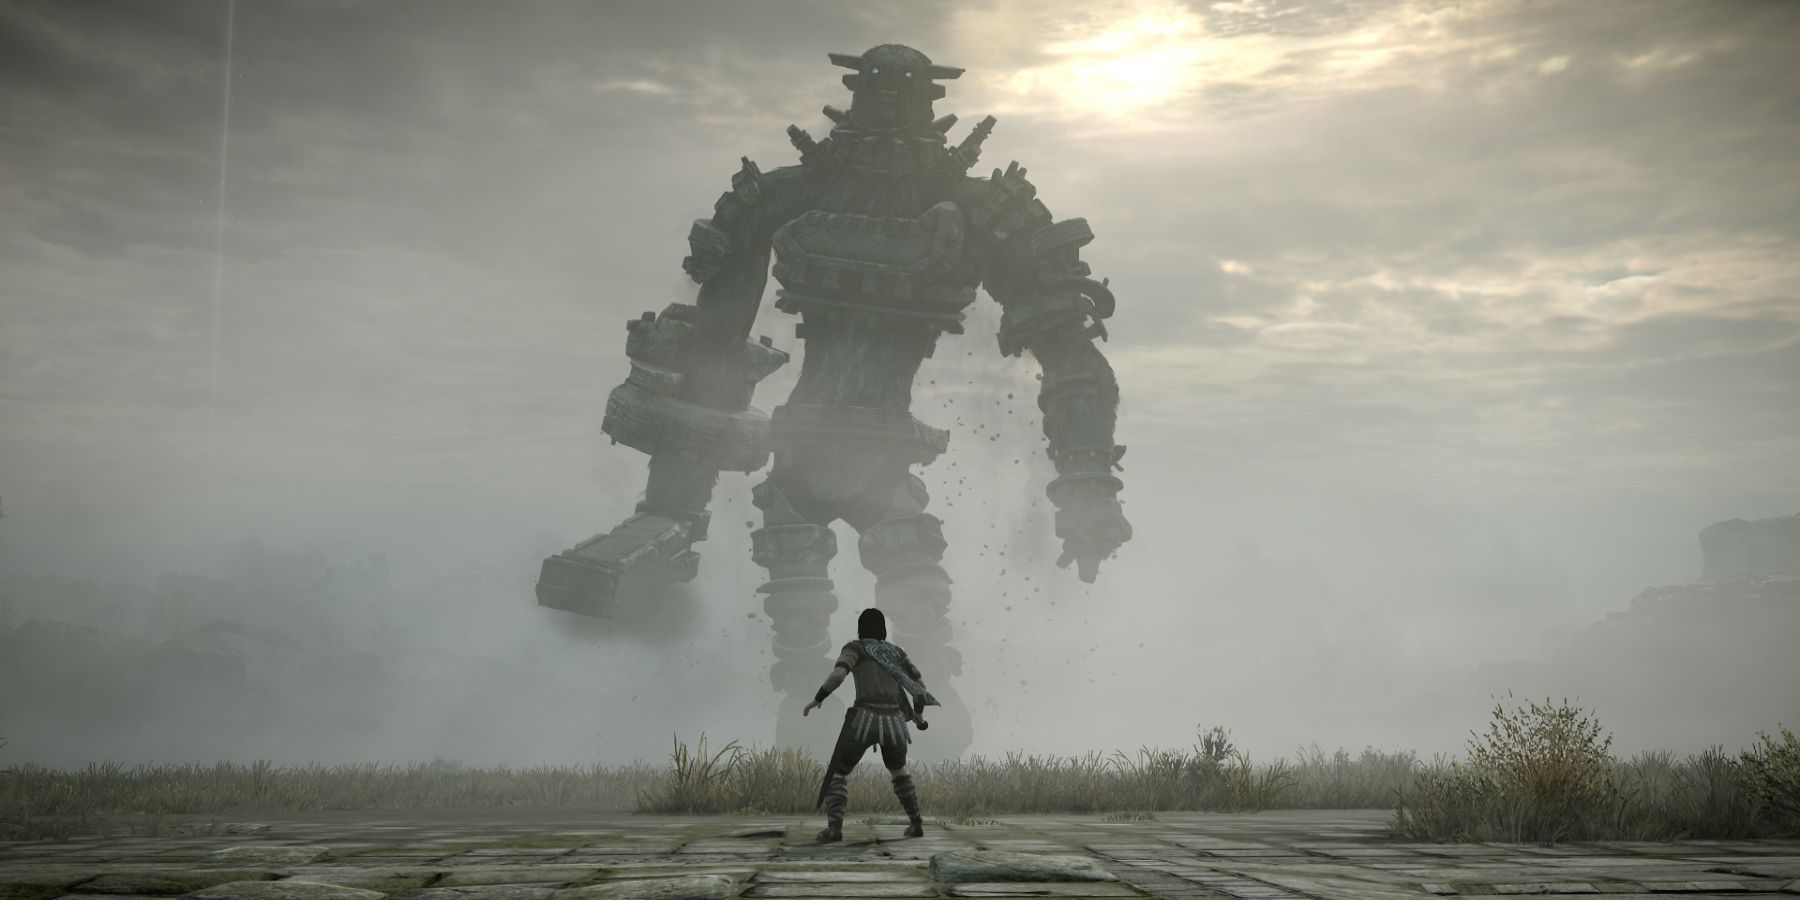 Wander faces off against the third Colossus in Shadow of the Colossus